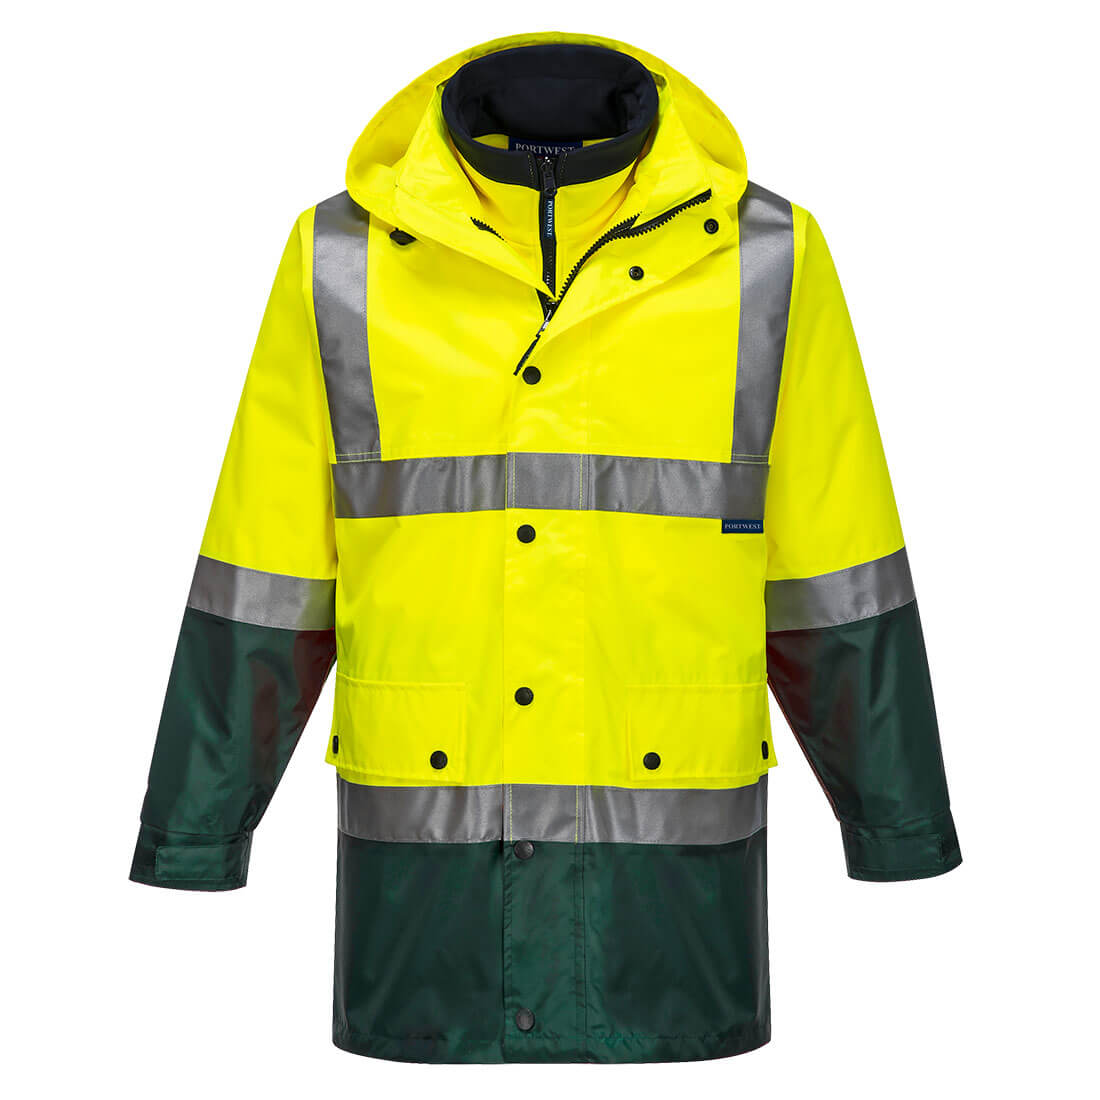 Portwest Eyre Day/Night 4-in-1 Jacket (MJ881)